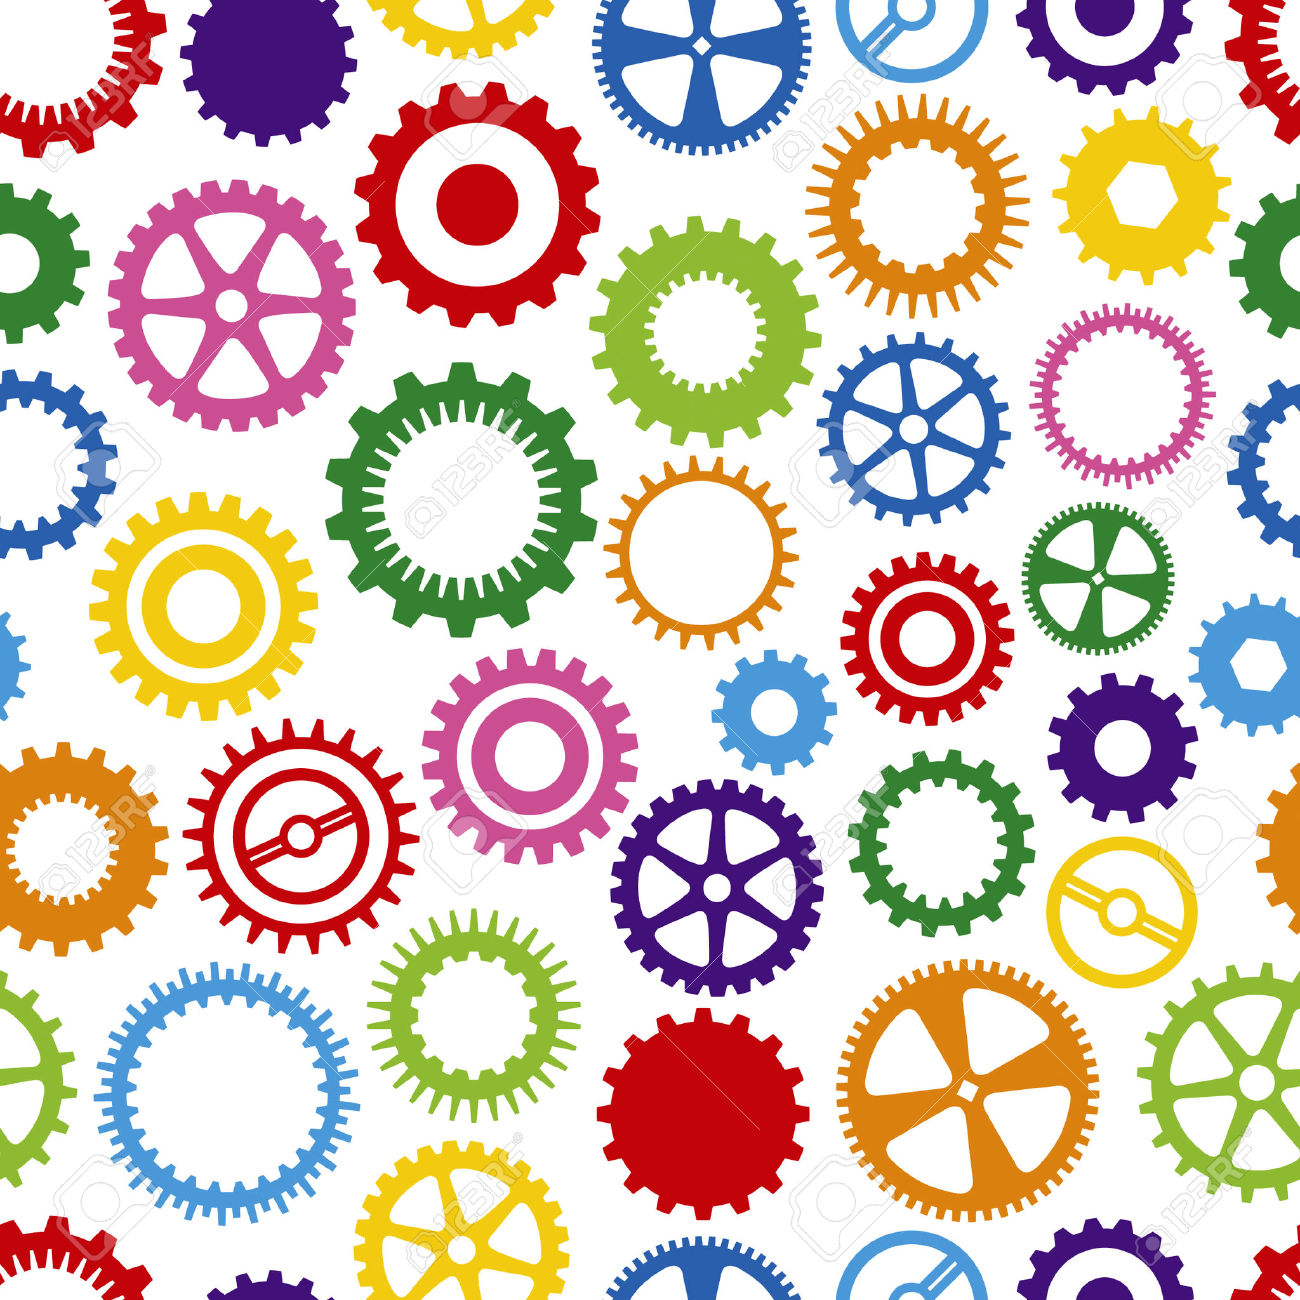 Colorful gear clipart.